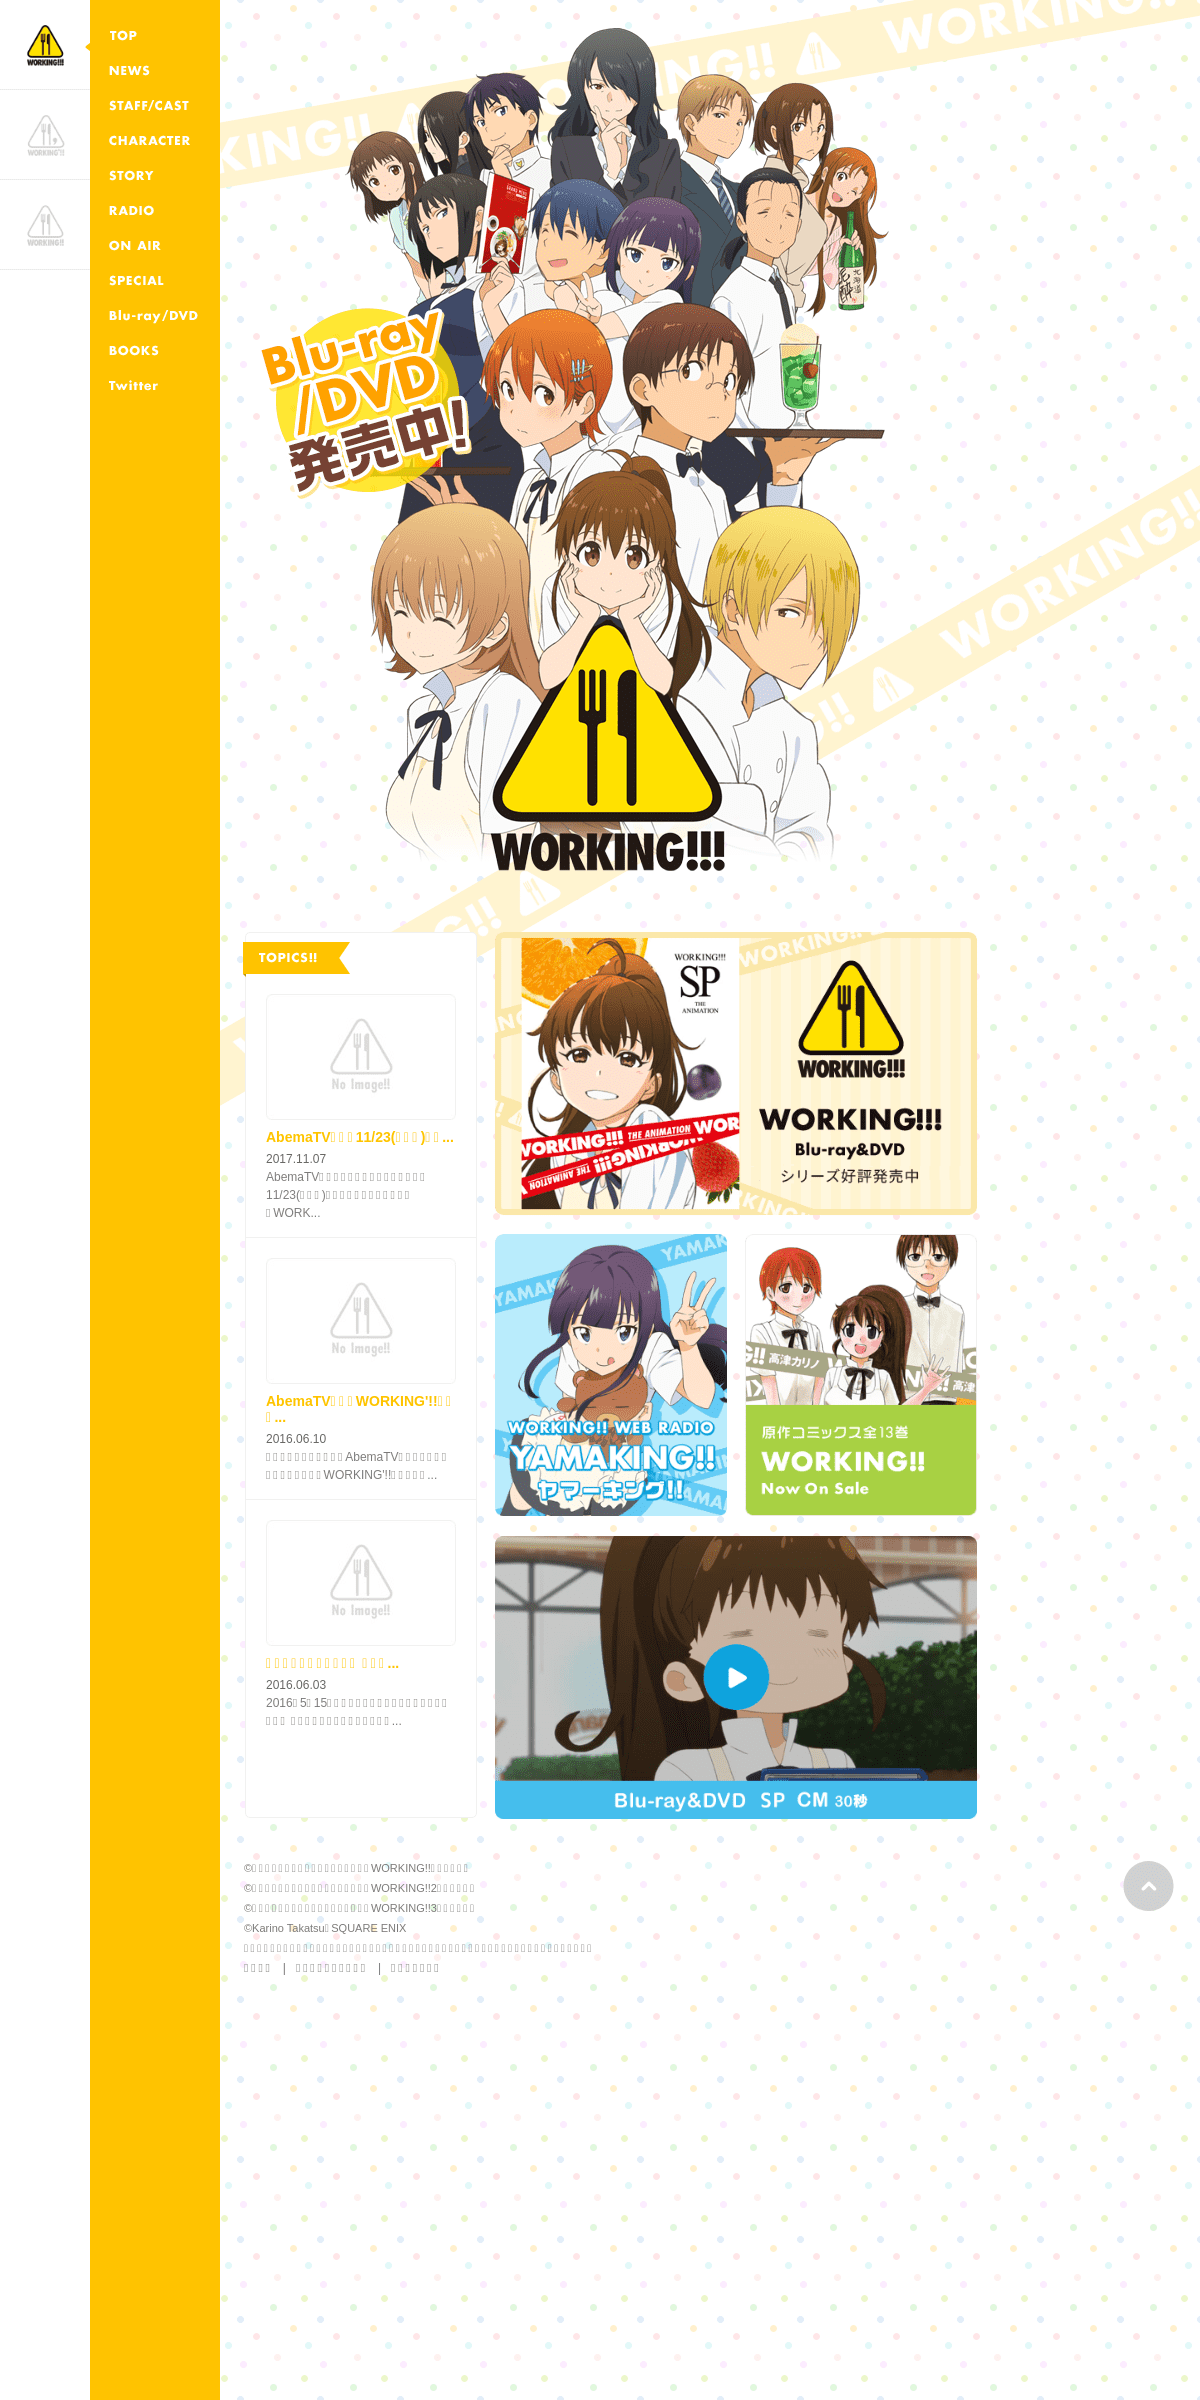 A complete backup of wagnaria.com